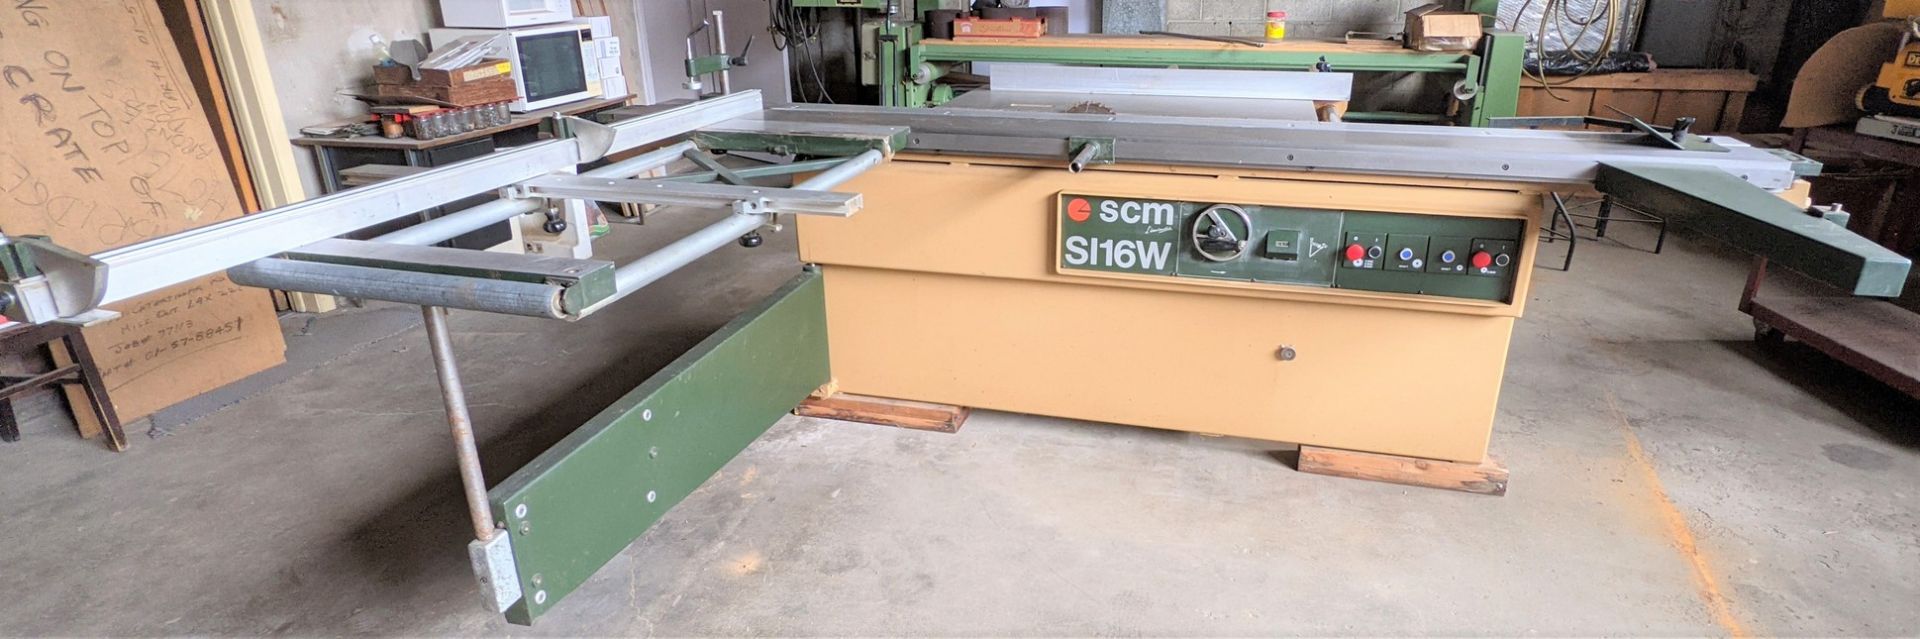 SCM SI16W SLIDING TABLE SAW, TILTING BLADE FROM 90 TO 45 DEGREES, S/N AB.11438, 1,150MM X 630MM - Image 11 of 14